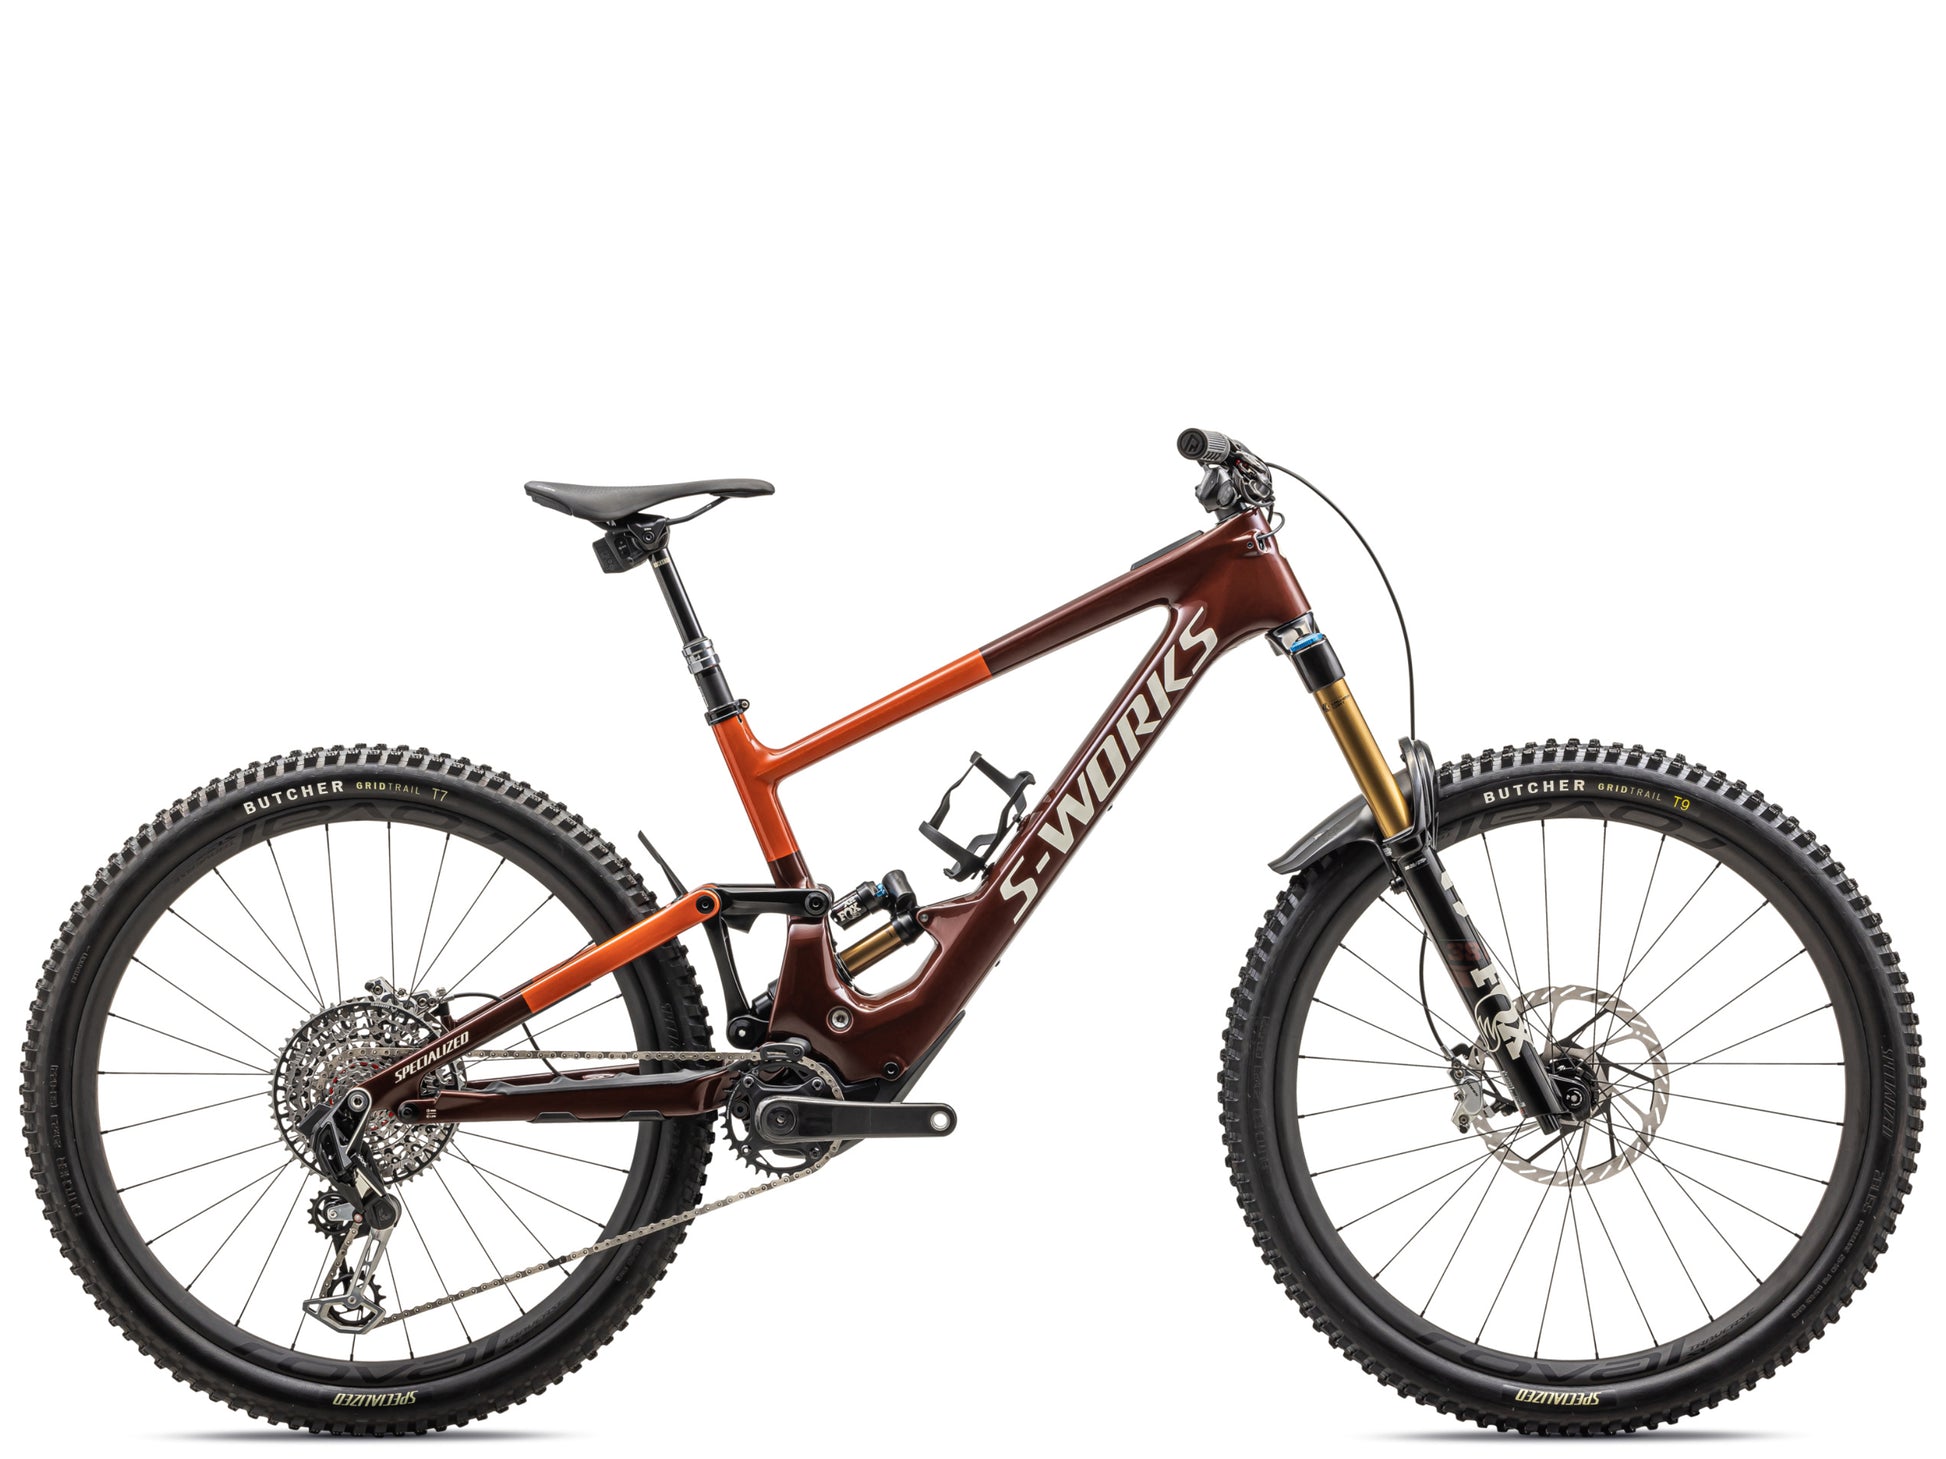 Specialized Kenevo SL S-Works Carbon Full Suspension eMTB Rust red / redwood / white mountains Side profile